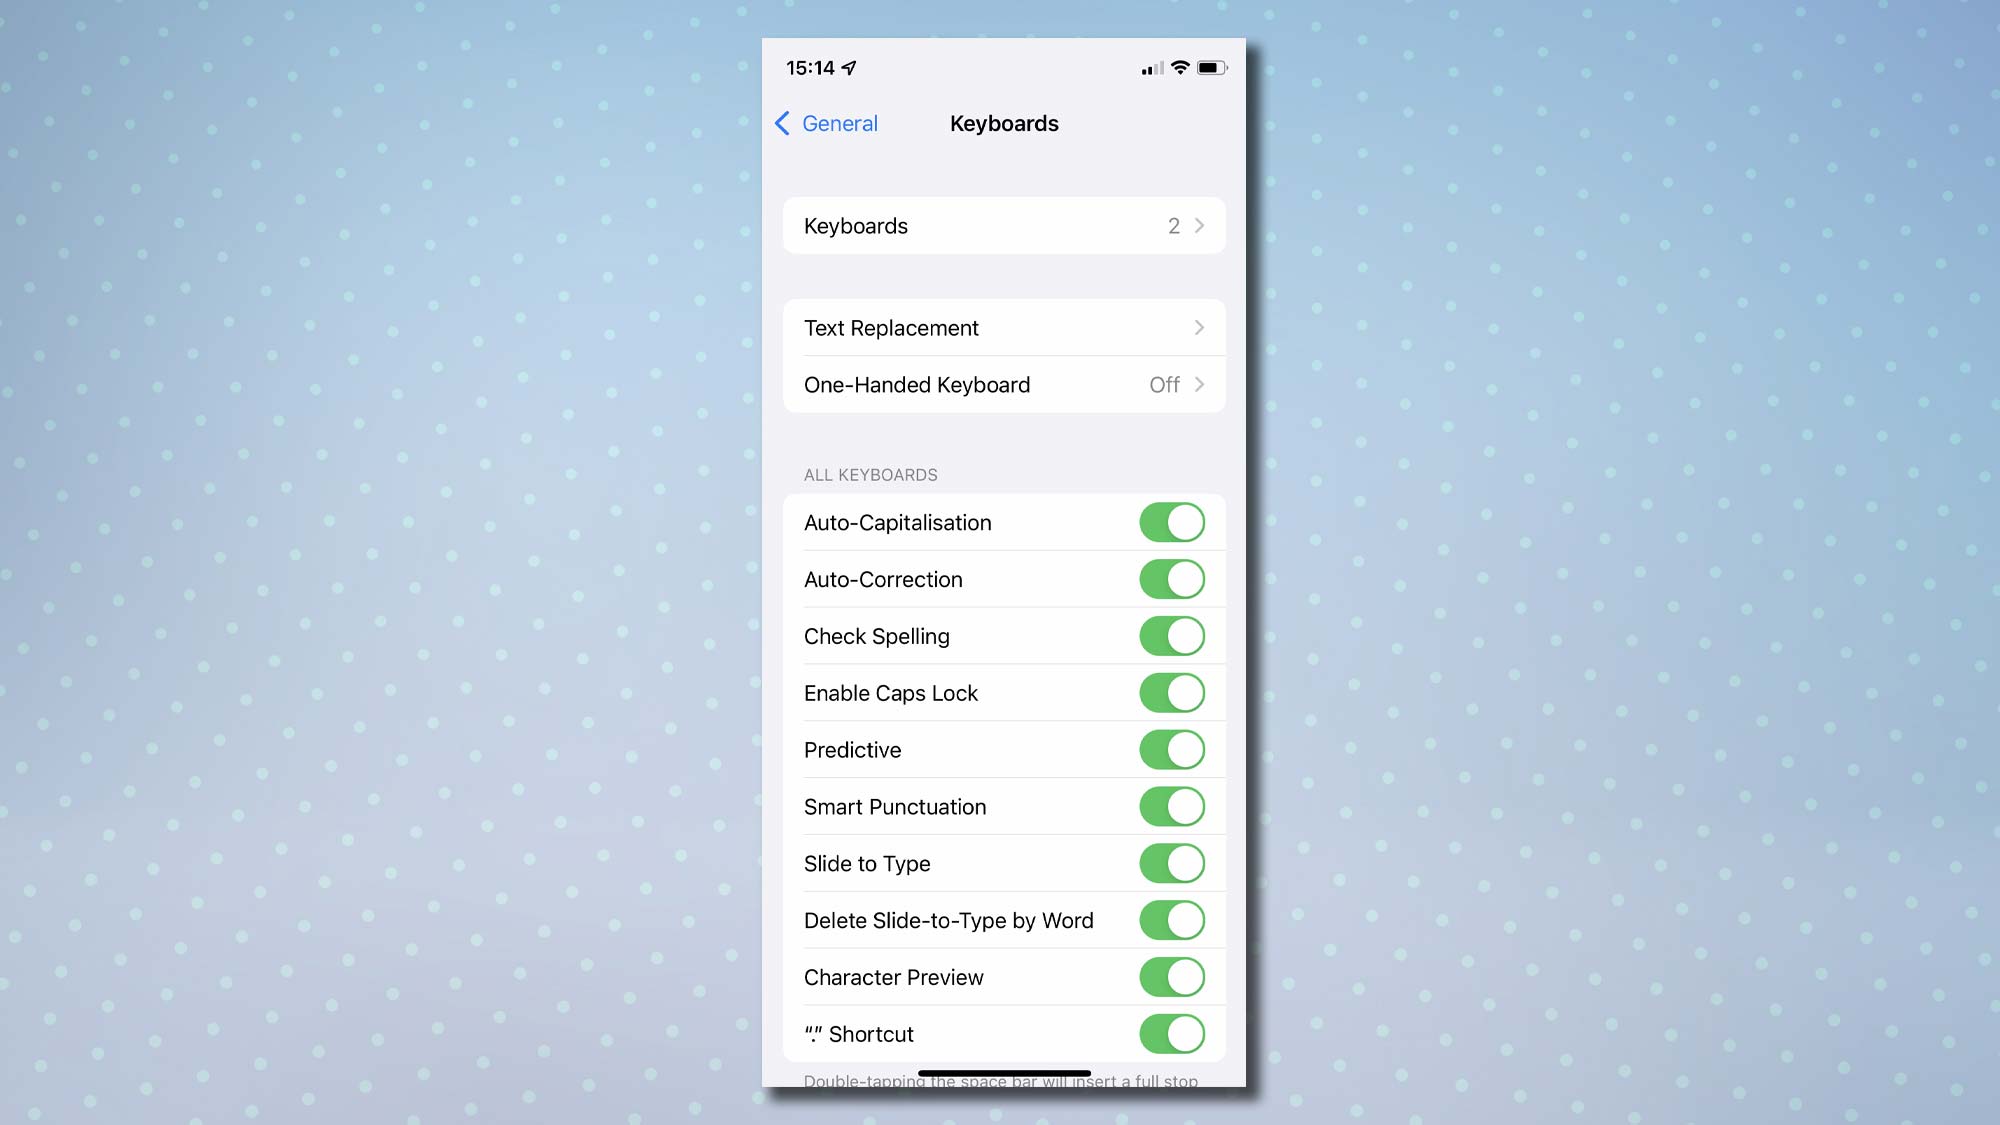 A screenshot showing the Keyboard options in an iPhone's Settings